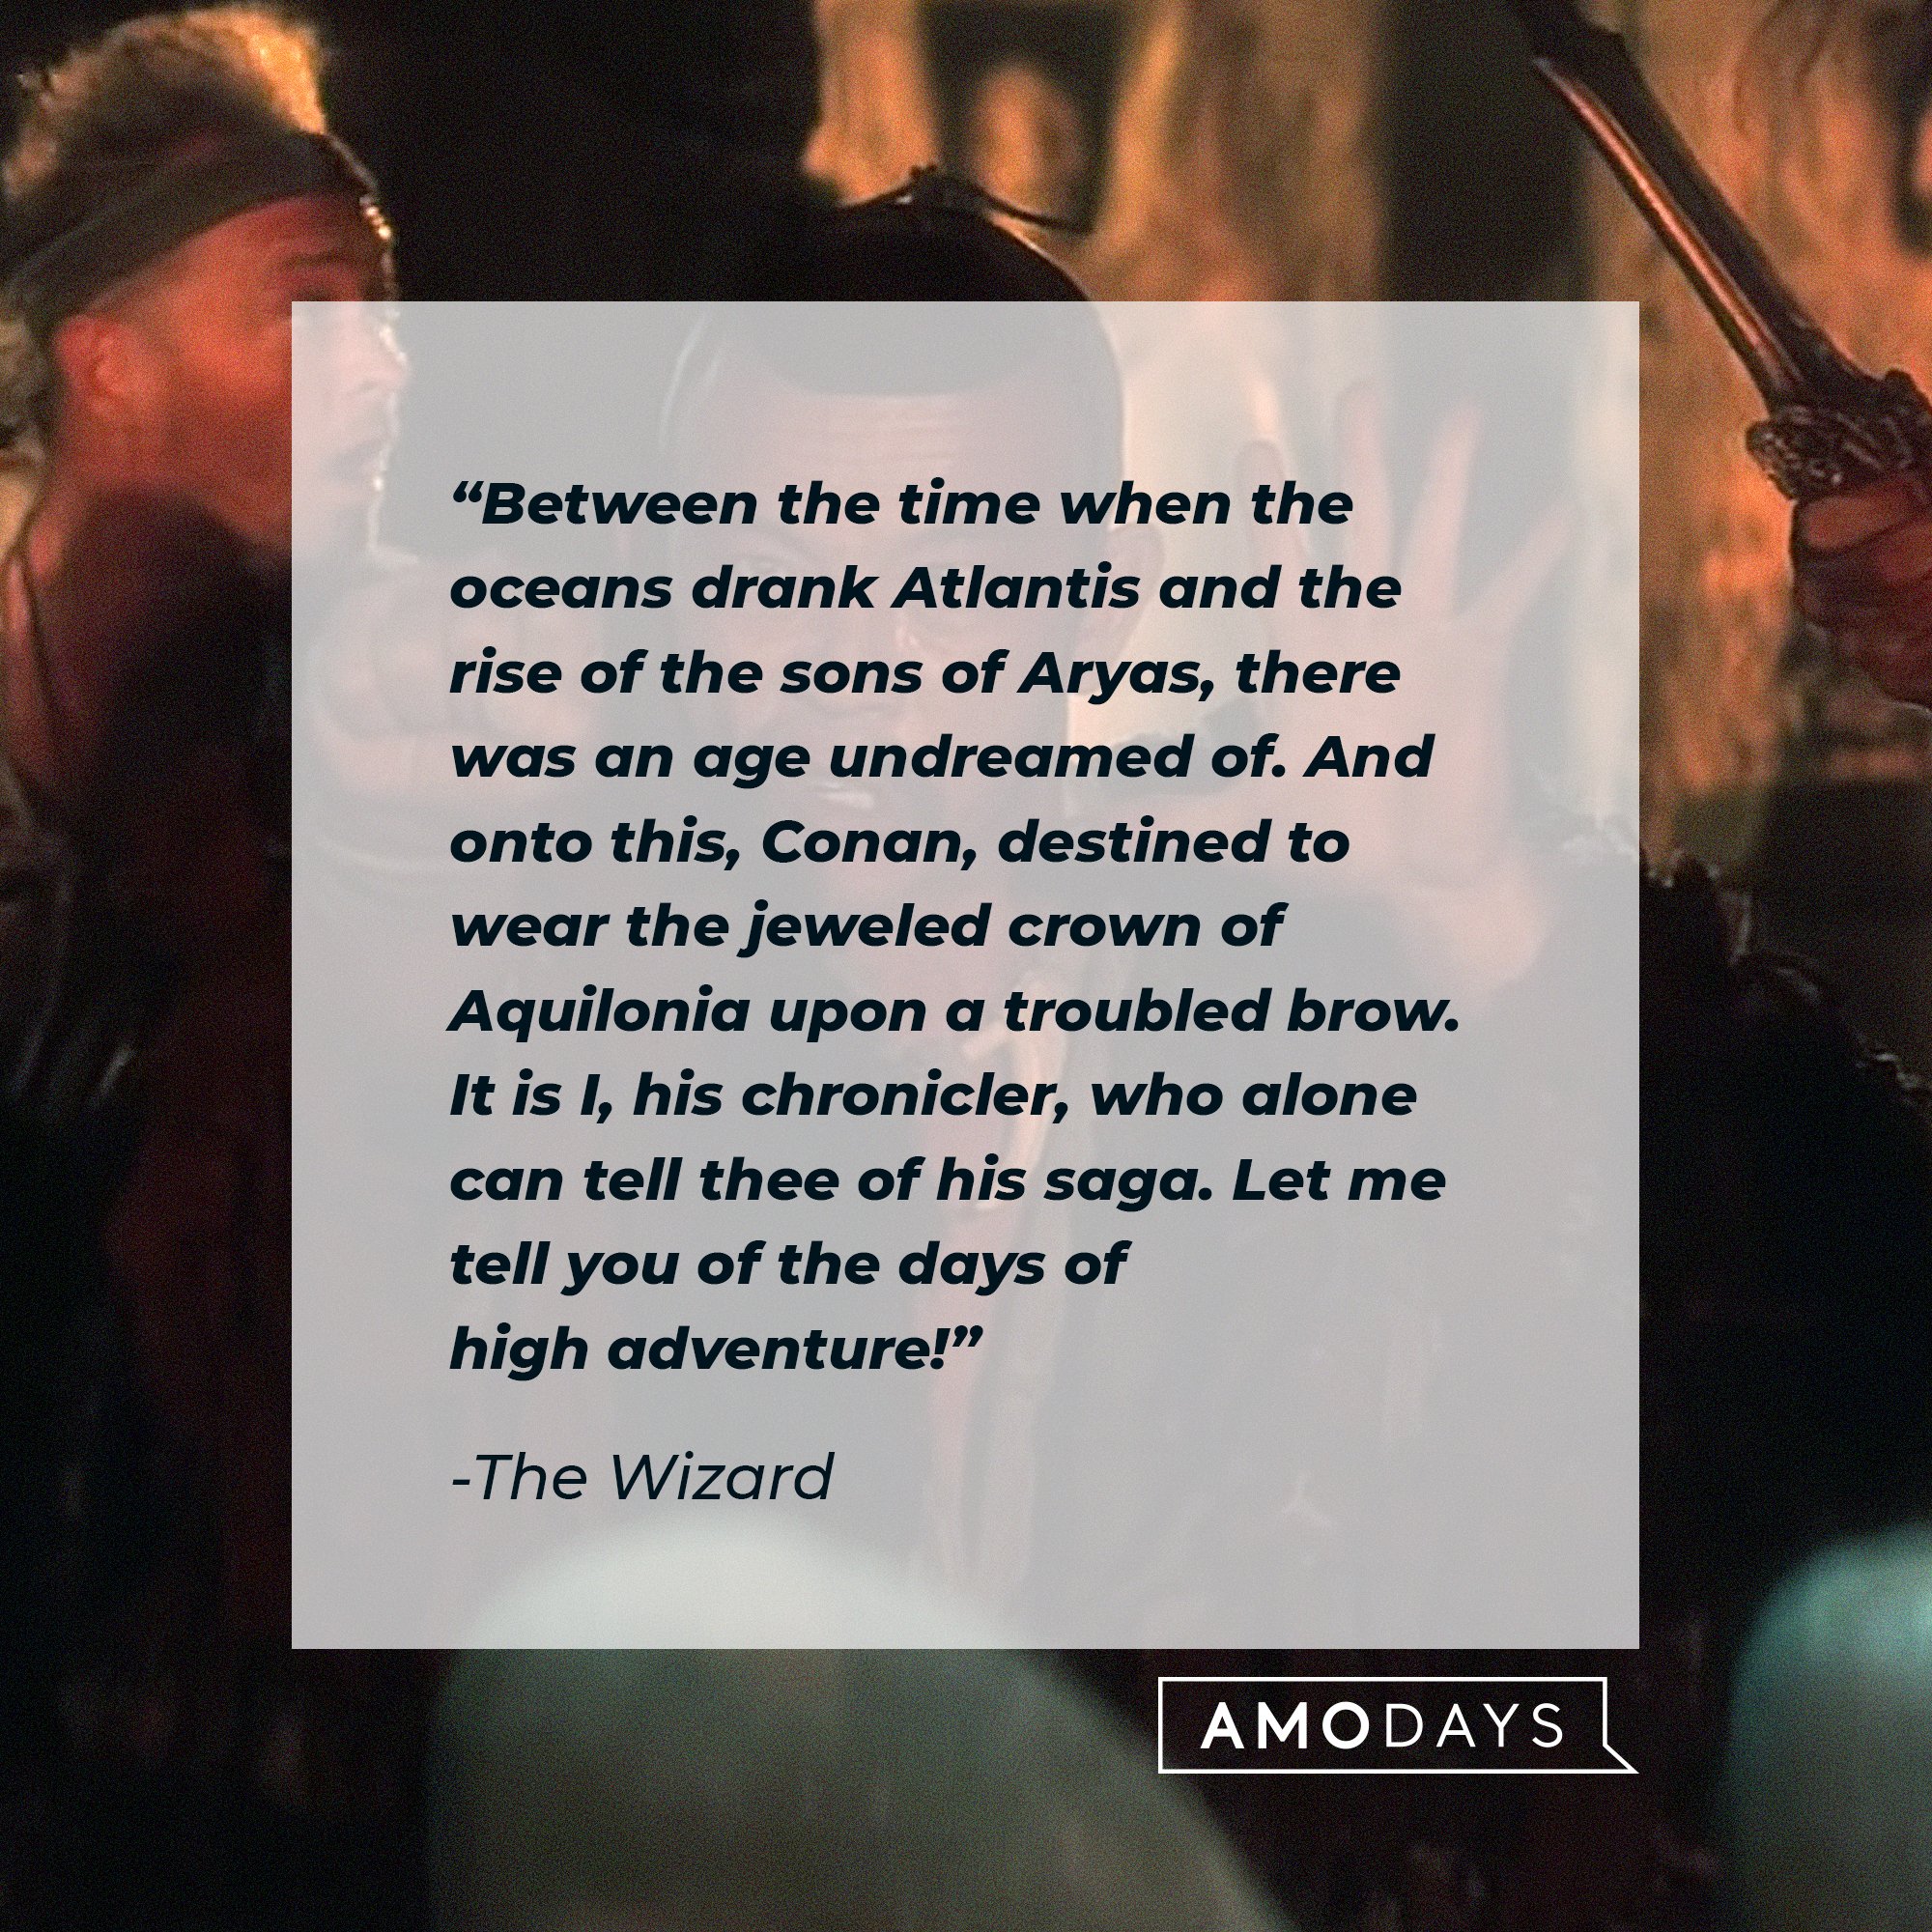 The Wizard's quote: “Between the time when the oceans drank Atlantis and the rise of the sons of Aryas, there was an age undreamed of. And onto this, Conan, destined to wear the jeweled crown of Aquilonia upon a troubled brow. It is I, his chronicler, who alone can tell thee of his saga. Let me tell you of the days of high adventure!” | Image: AmoDays